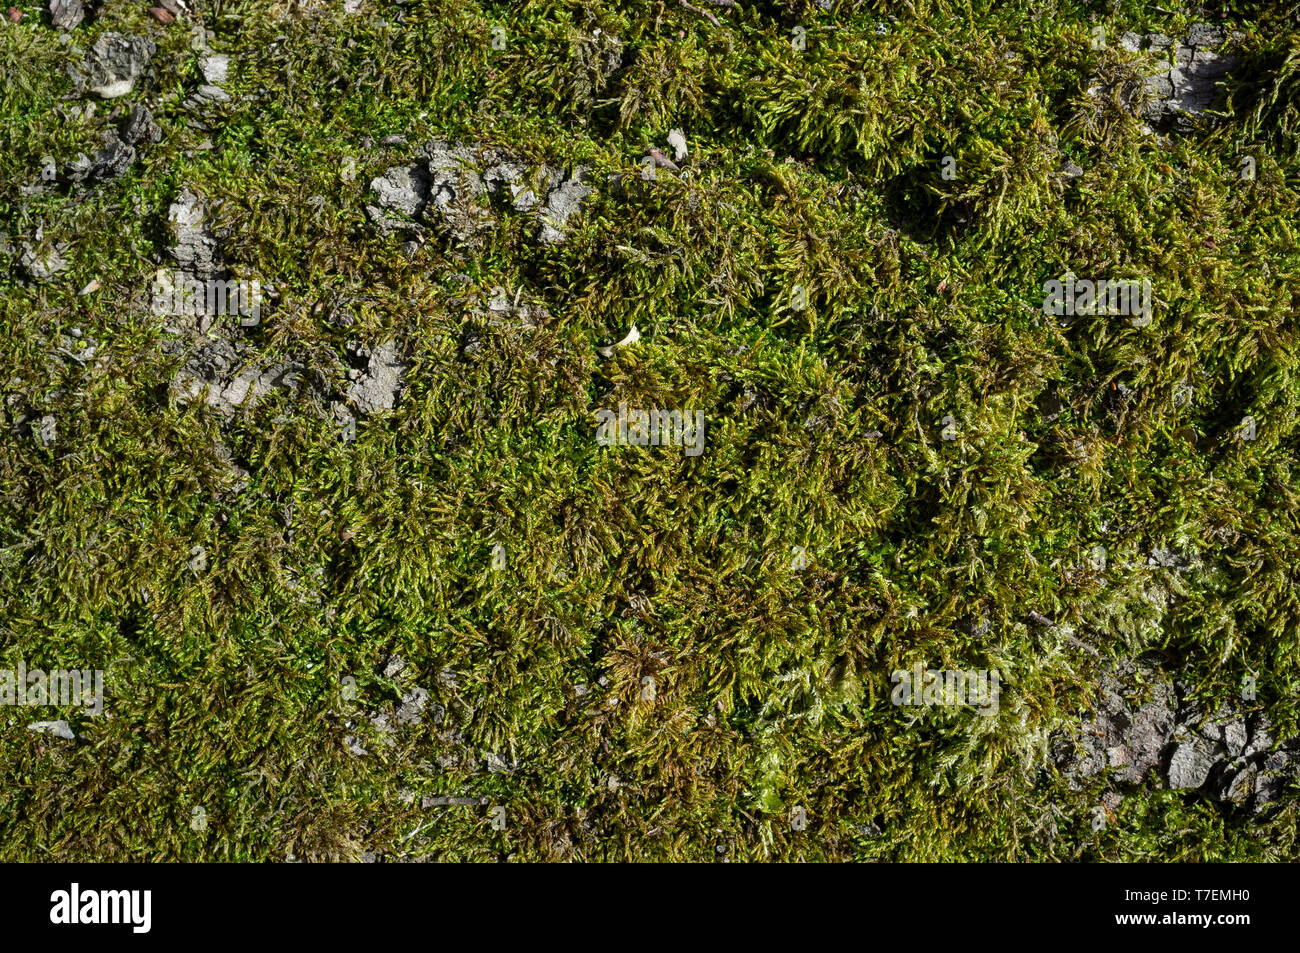 Poplar Tree Bark or Rhytidome covered with Green Moss Texture Detail in Spring Forest Stock Photo